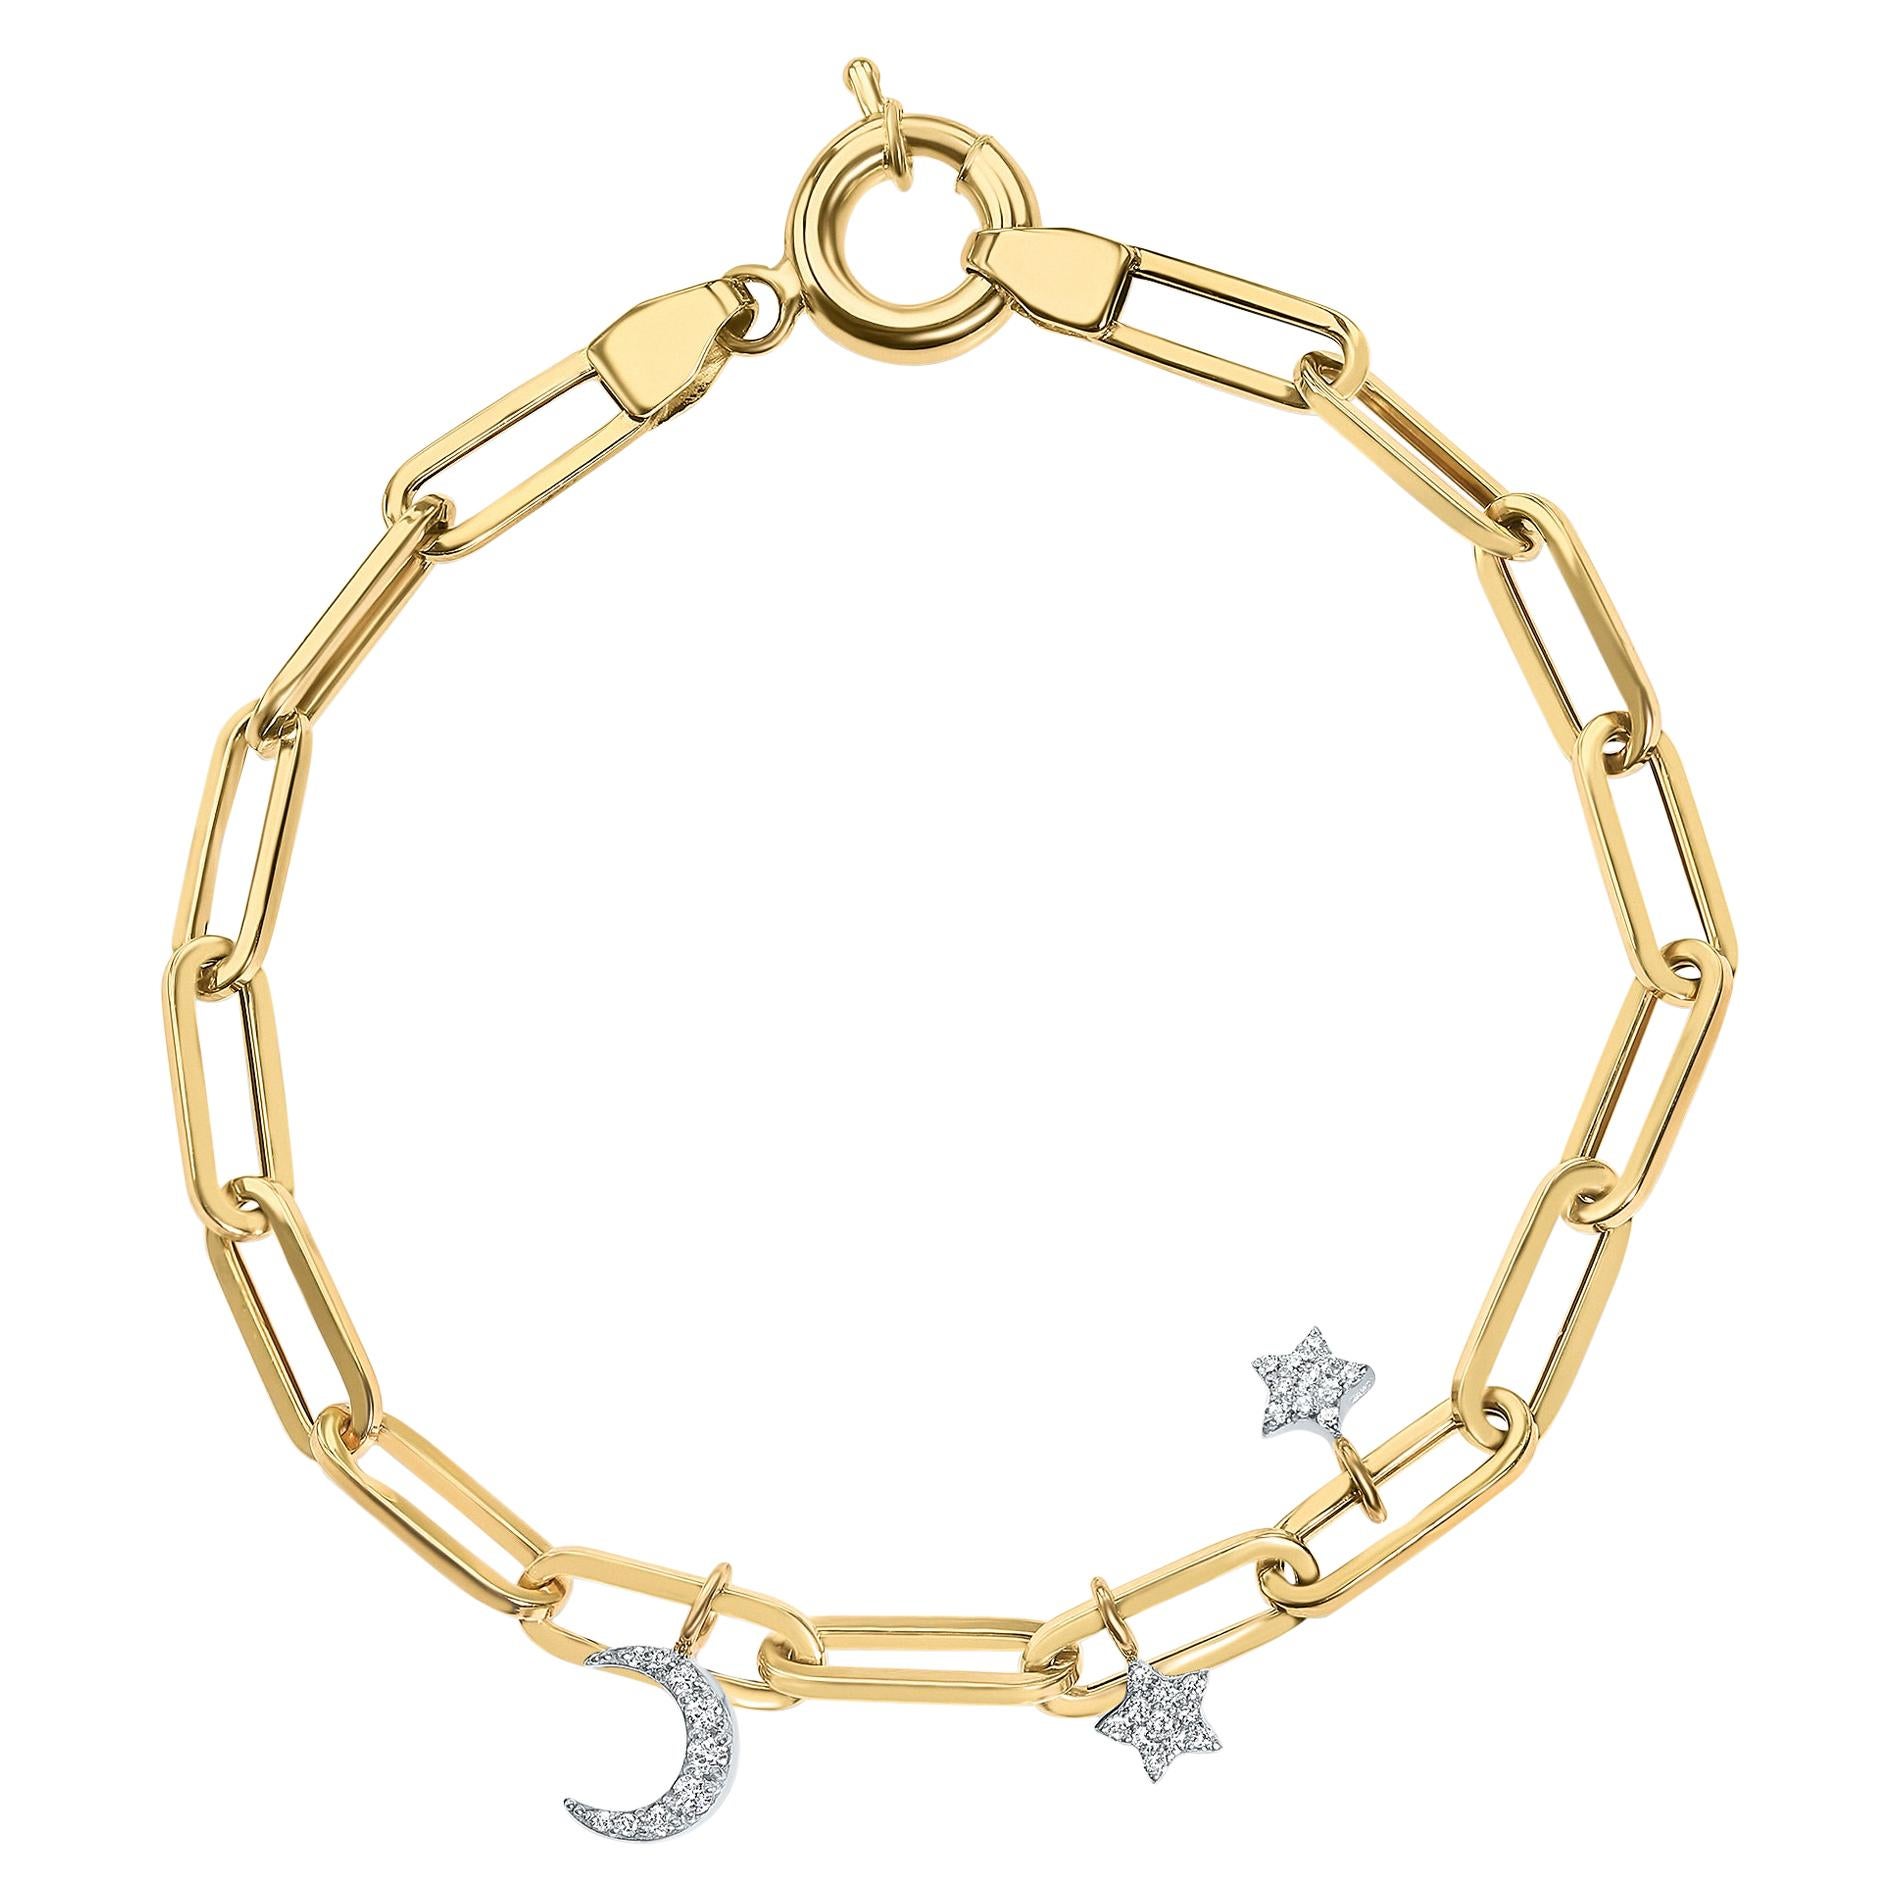 0.14 Carat Diamond Moon and Star Charms Cable Chain Bracelet - Shlomit Rogel For Sale